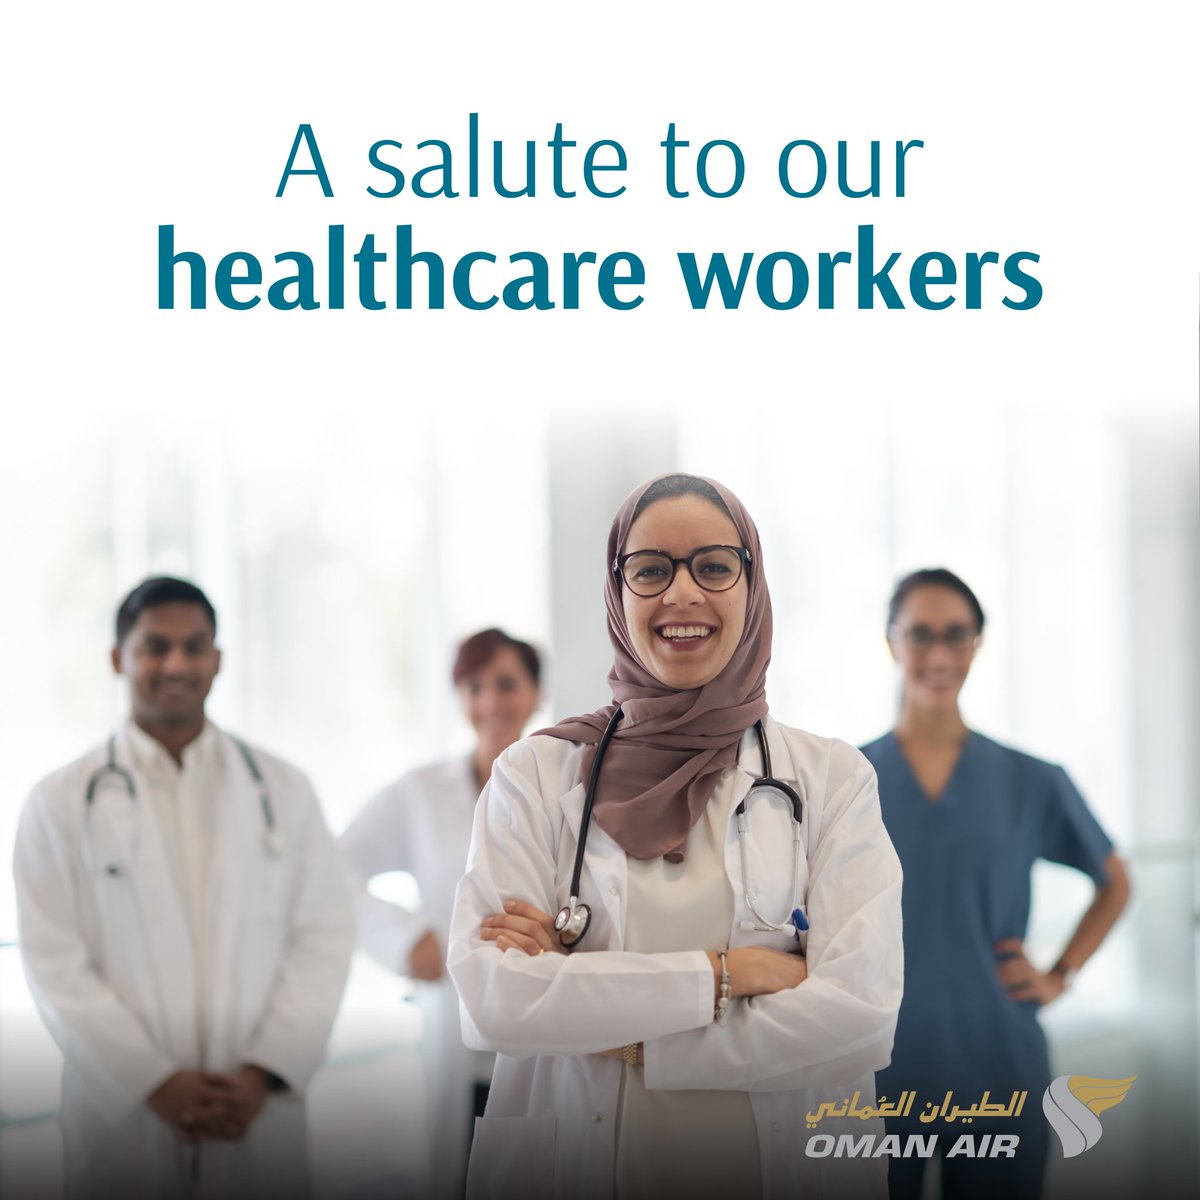 More than ever, we are grateful to #healthcareworkers in #Oman and around the world for their honourable work, dedication and sacrifices. #NursesDay2020